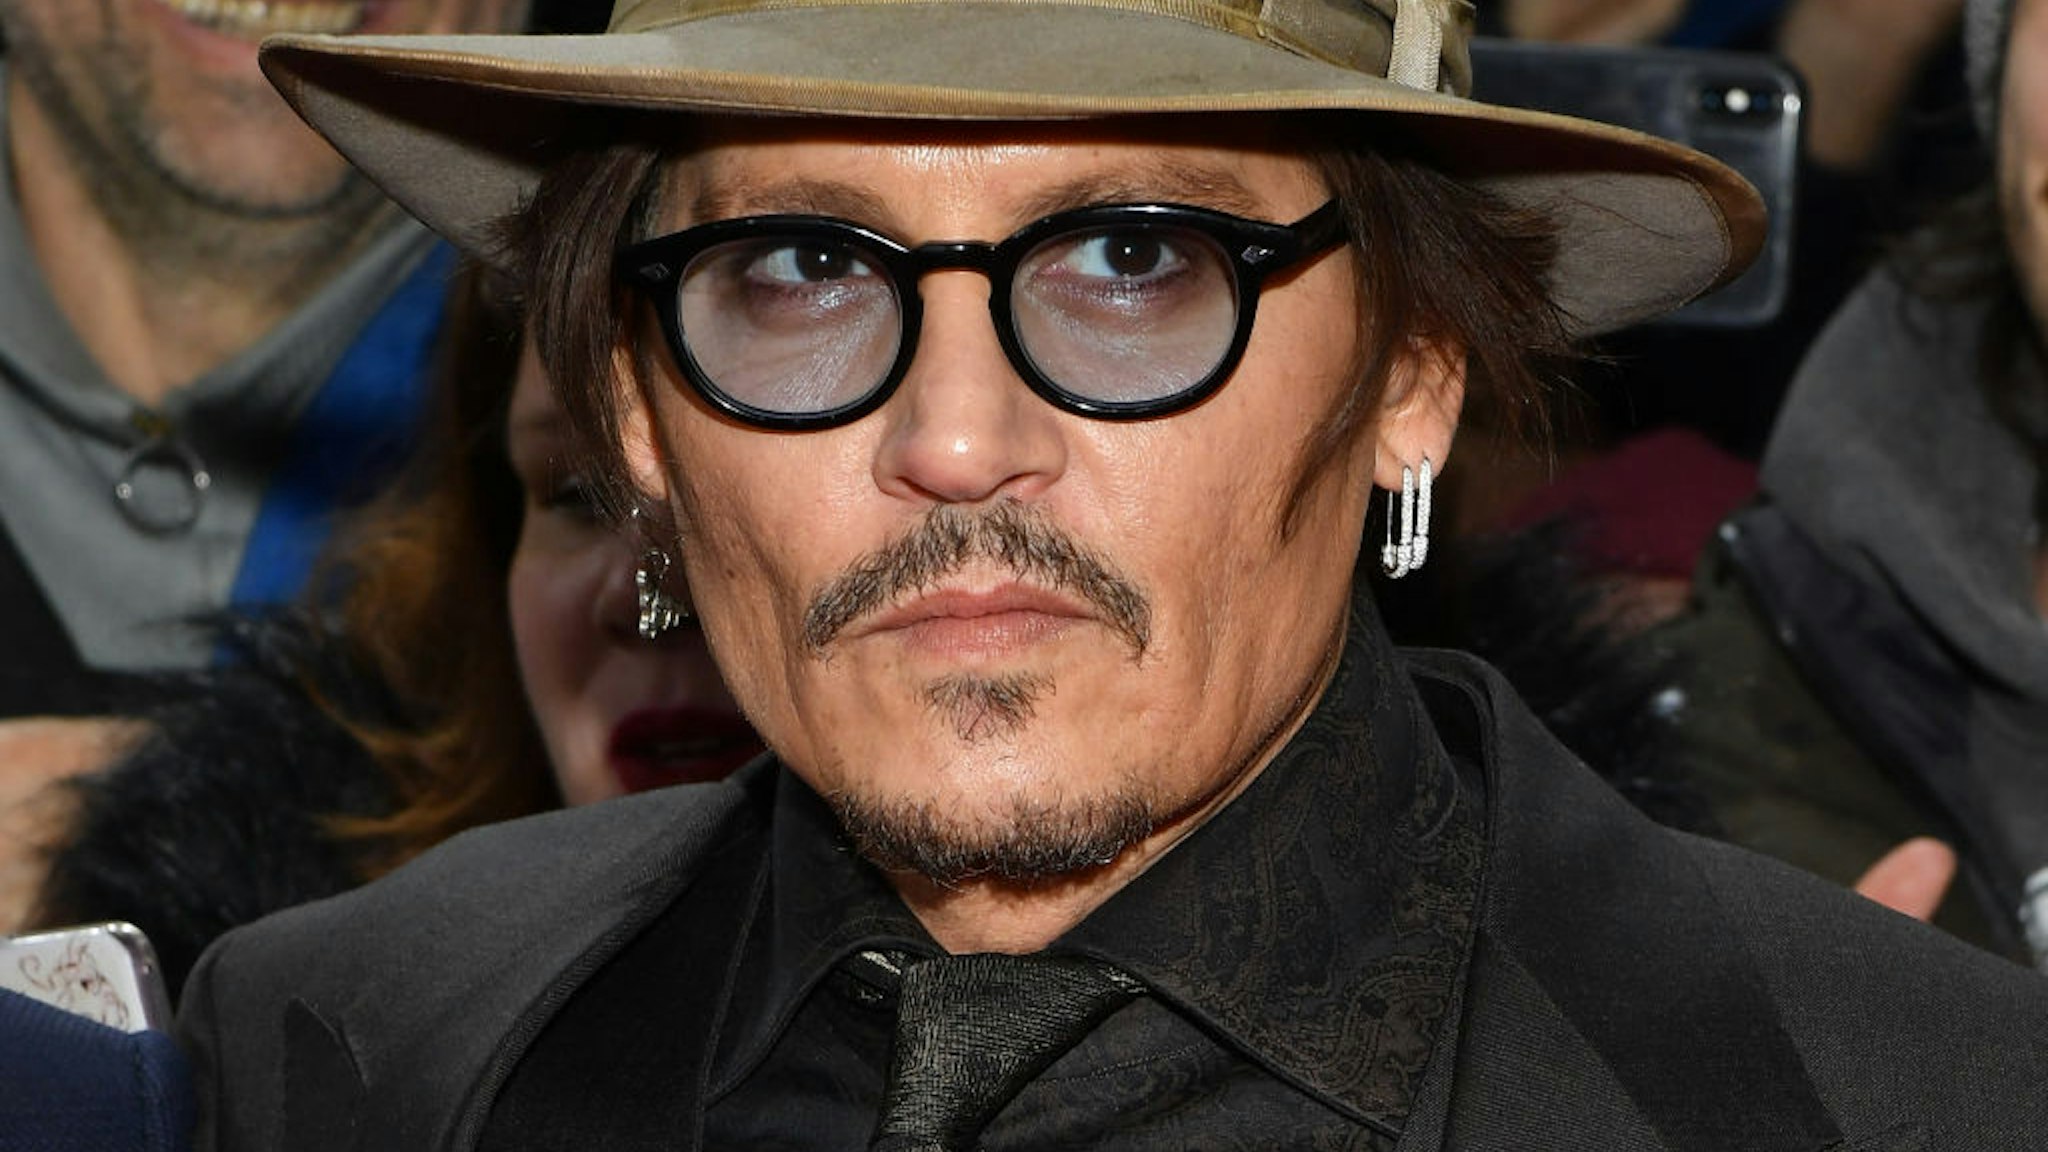 Johnny Depp poses at the "Minamata" premiere during the 70th Berlinale International Film Festival Berlin at Friedrichstadt-Palast on February 21, 2020 in Berlin, Germany.